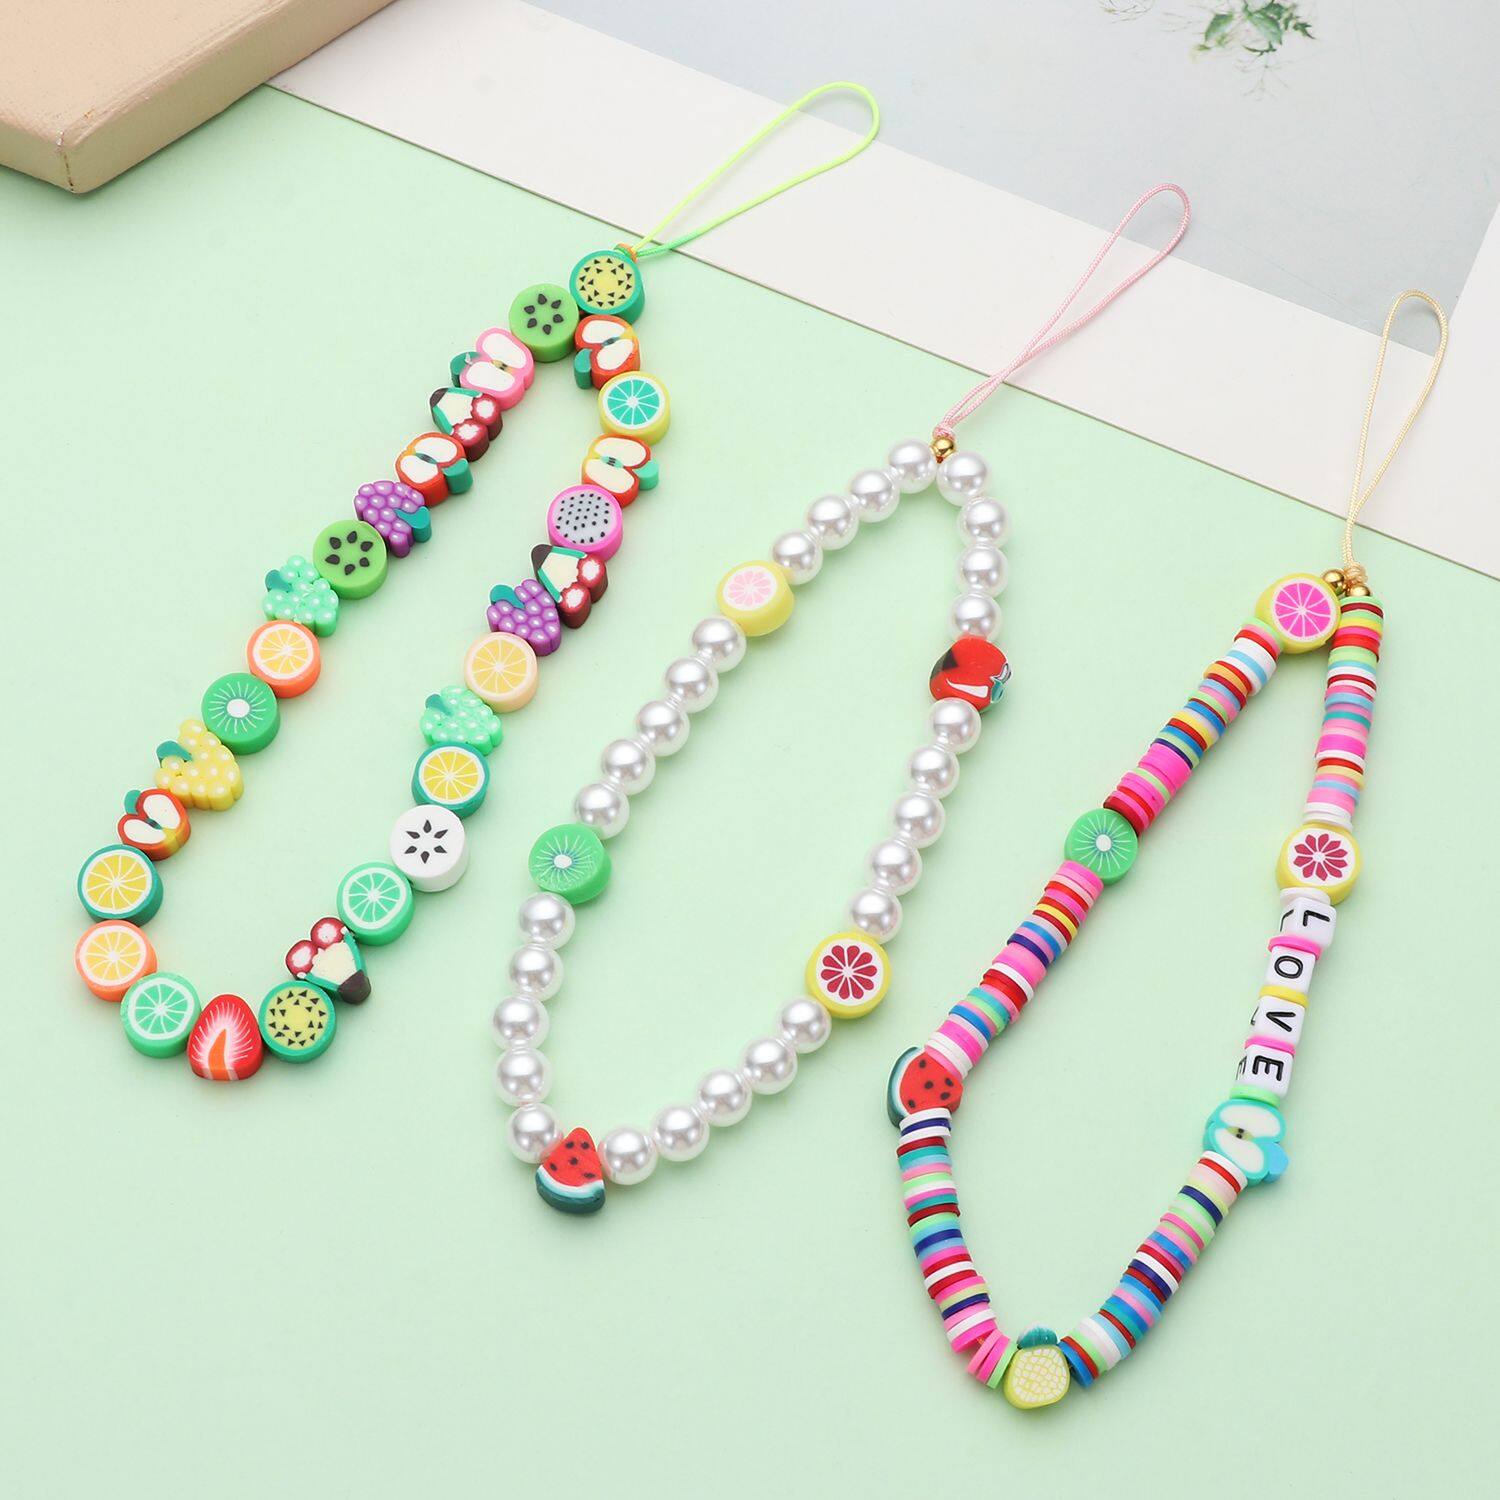 QIANGNAN6 Fashion Keychain Wrist Strap Rainbow Phone Strap Lanyard Cell Phone Case Hanging Cord Fruit Letter Pearl Beaded Polymer Clay